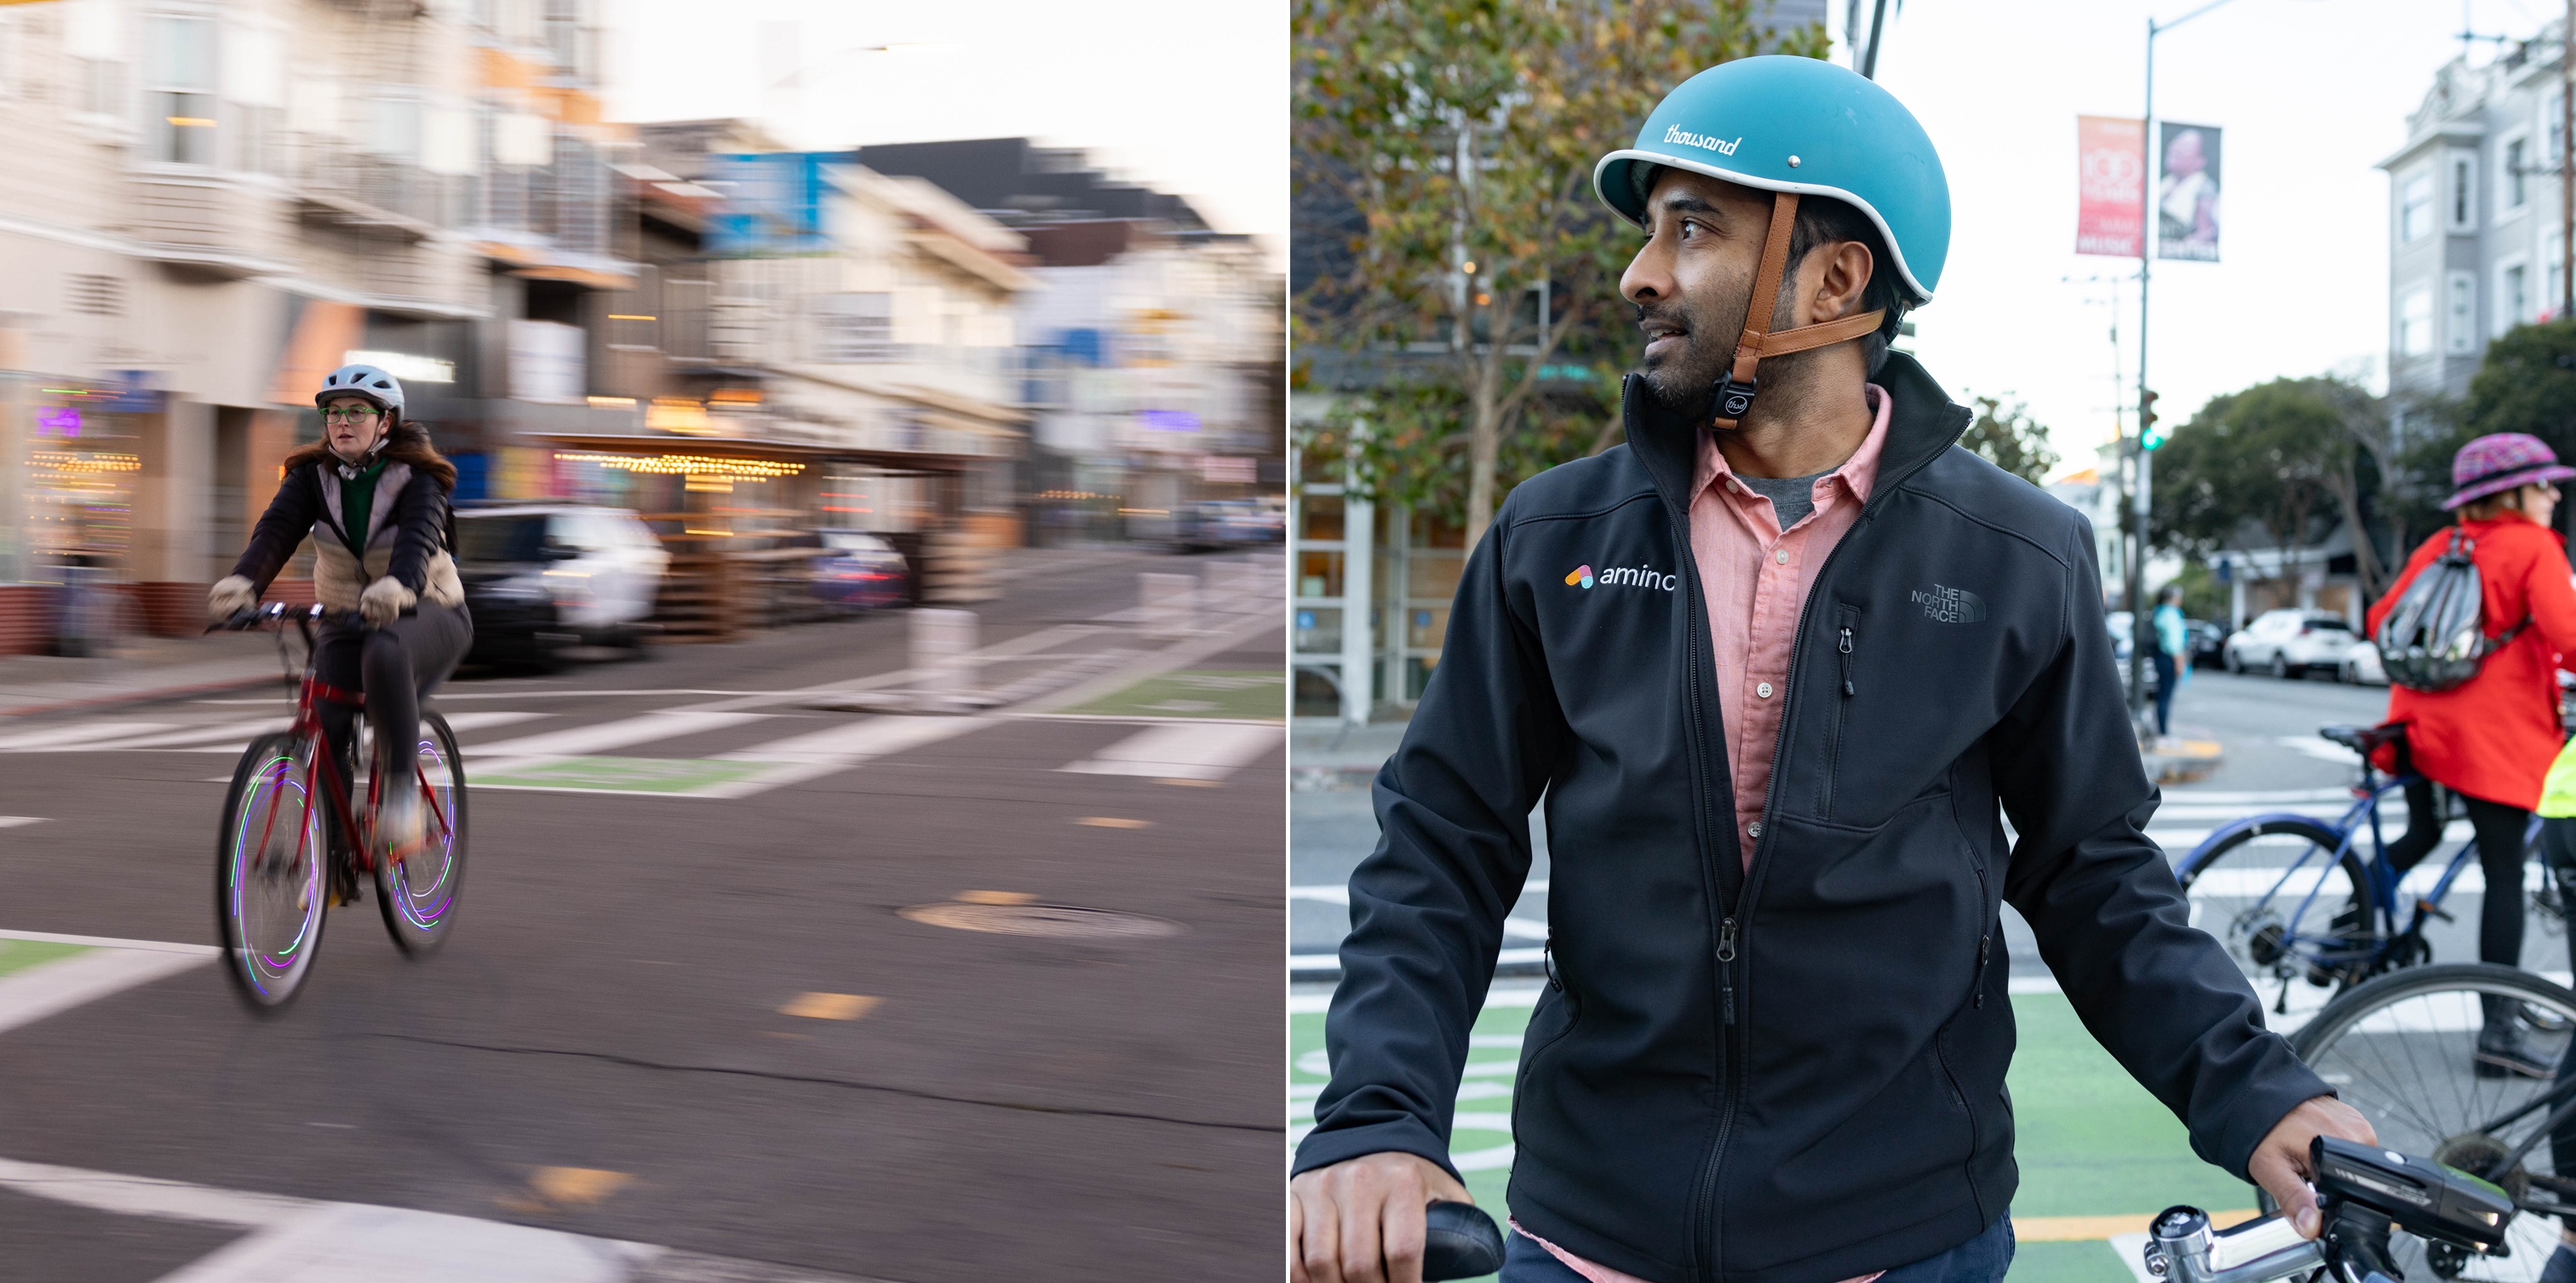 A composite image juxtaposes a blurred picture of a cyclist in motion with a South Asian man in profile, wearing a helmet and jacket.